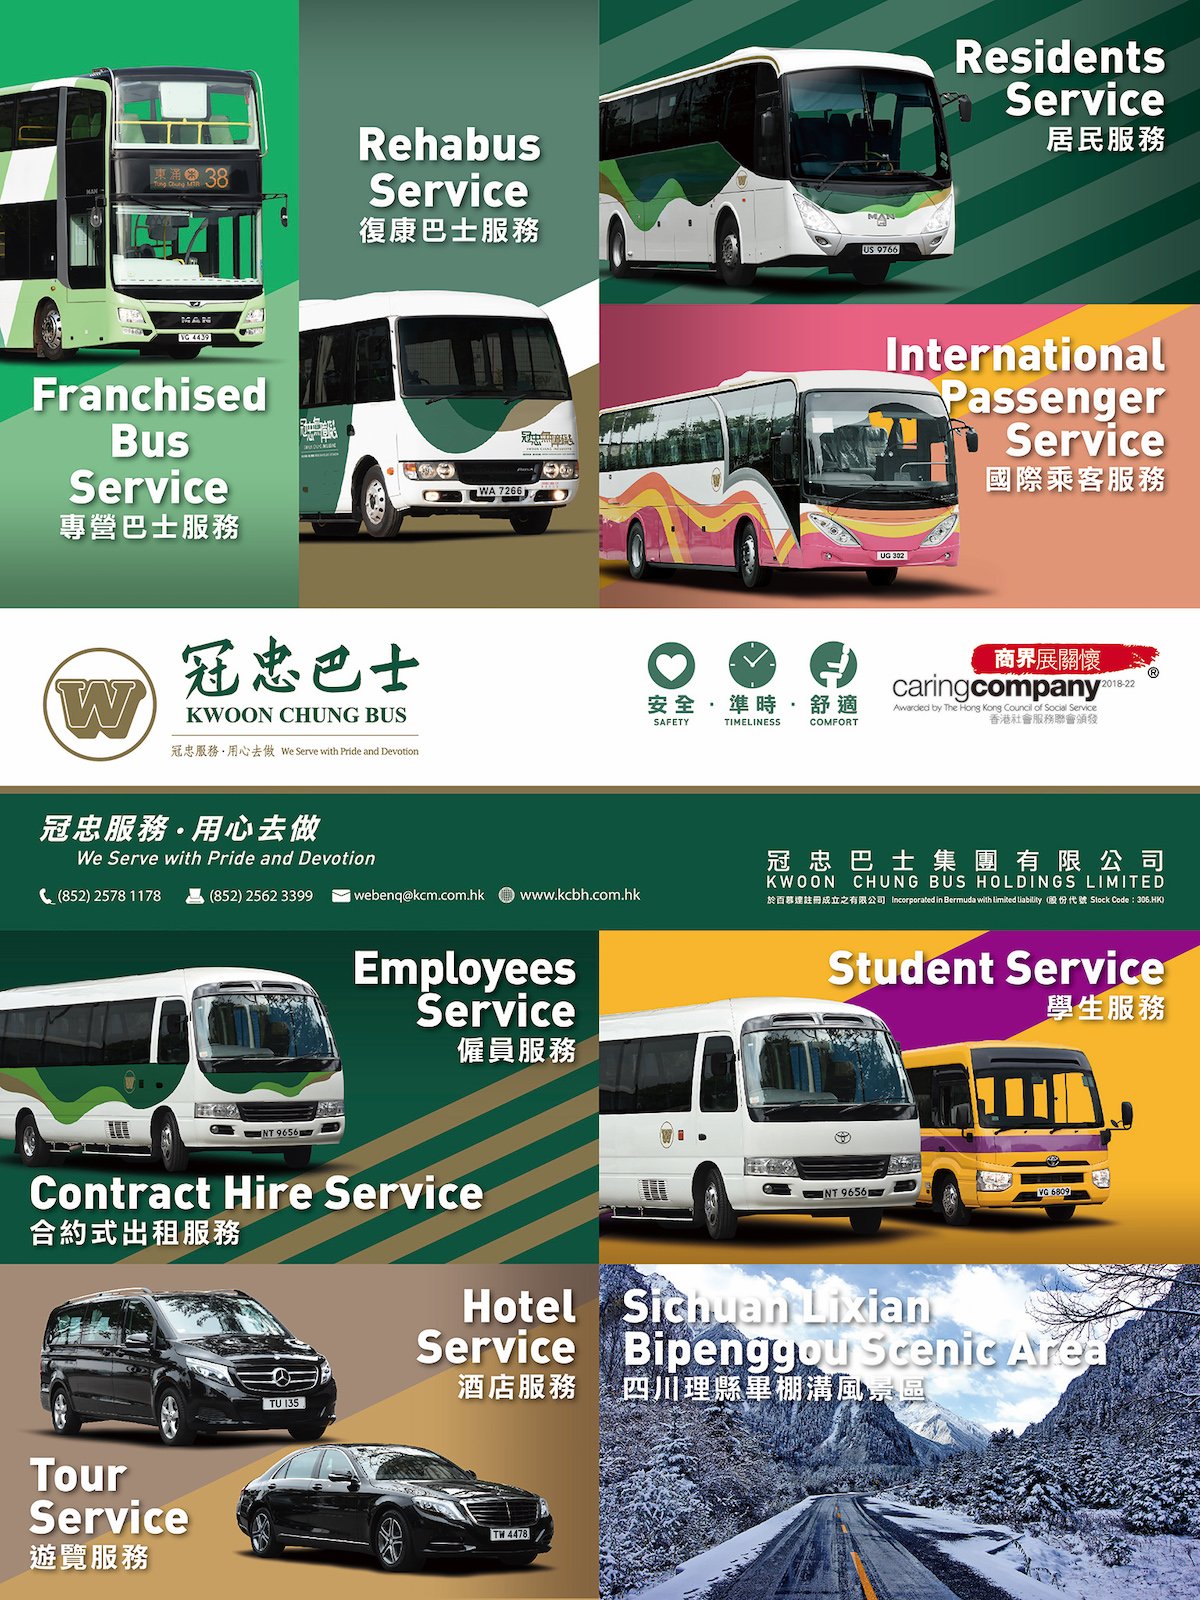 Kwoon Chung Bus Holdings